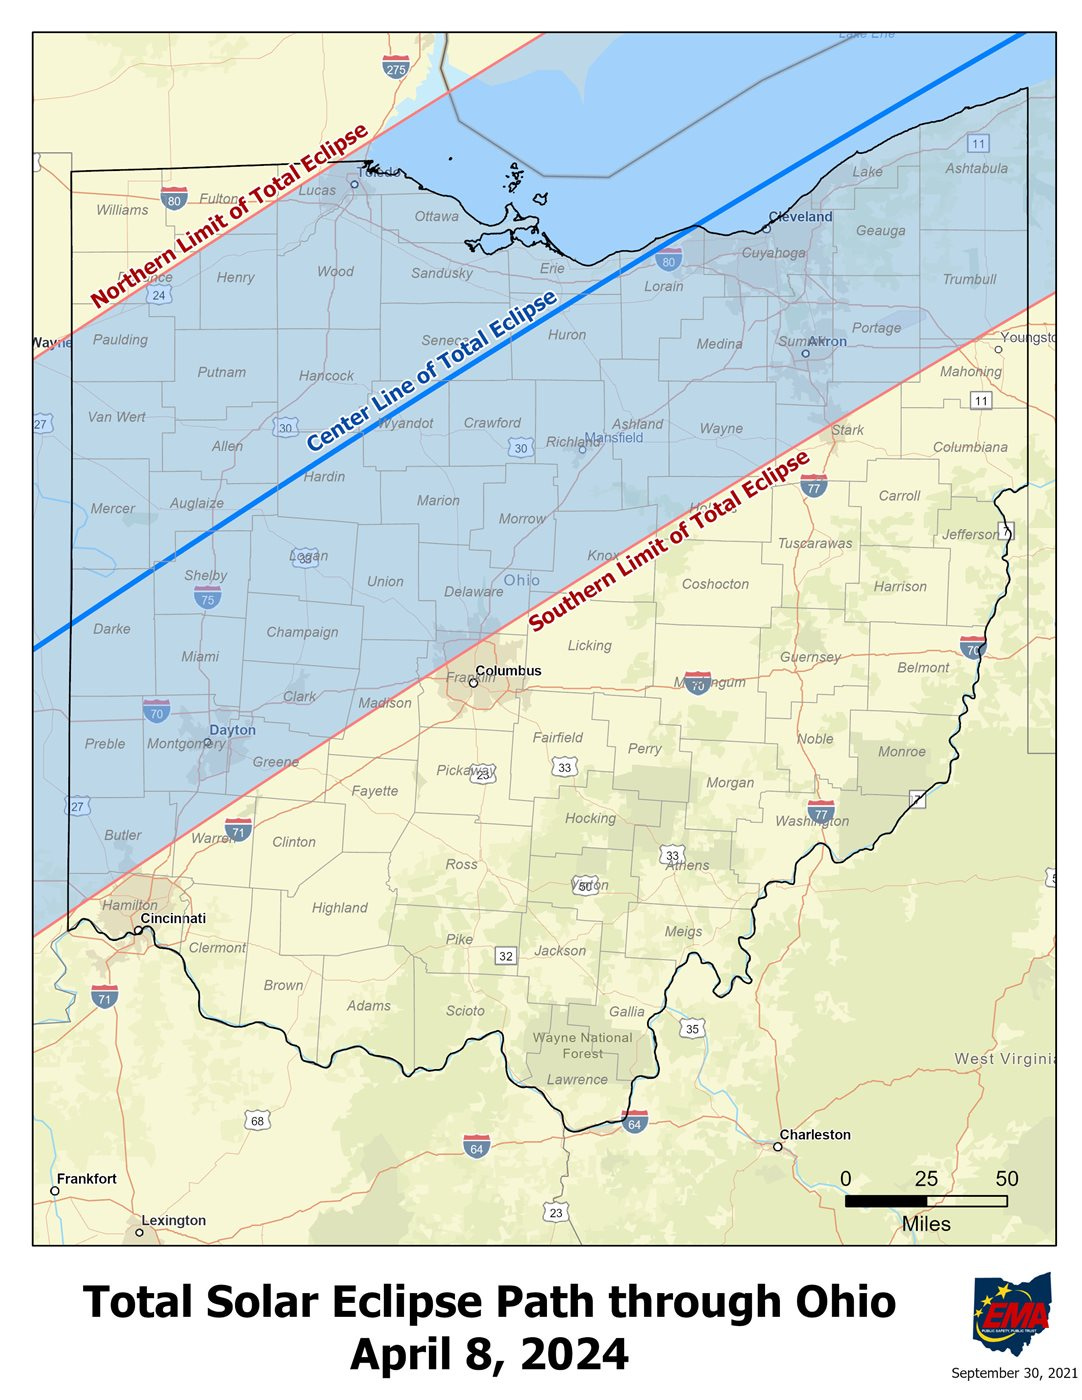 2024 Solar Eclipse | Ohio Department of Education and Workforce